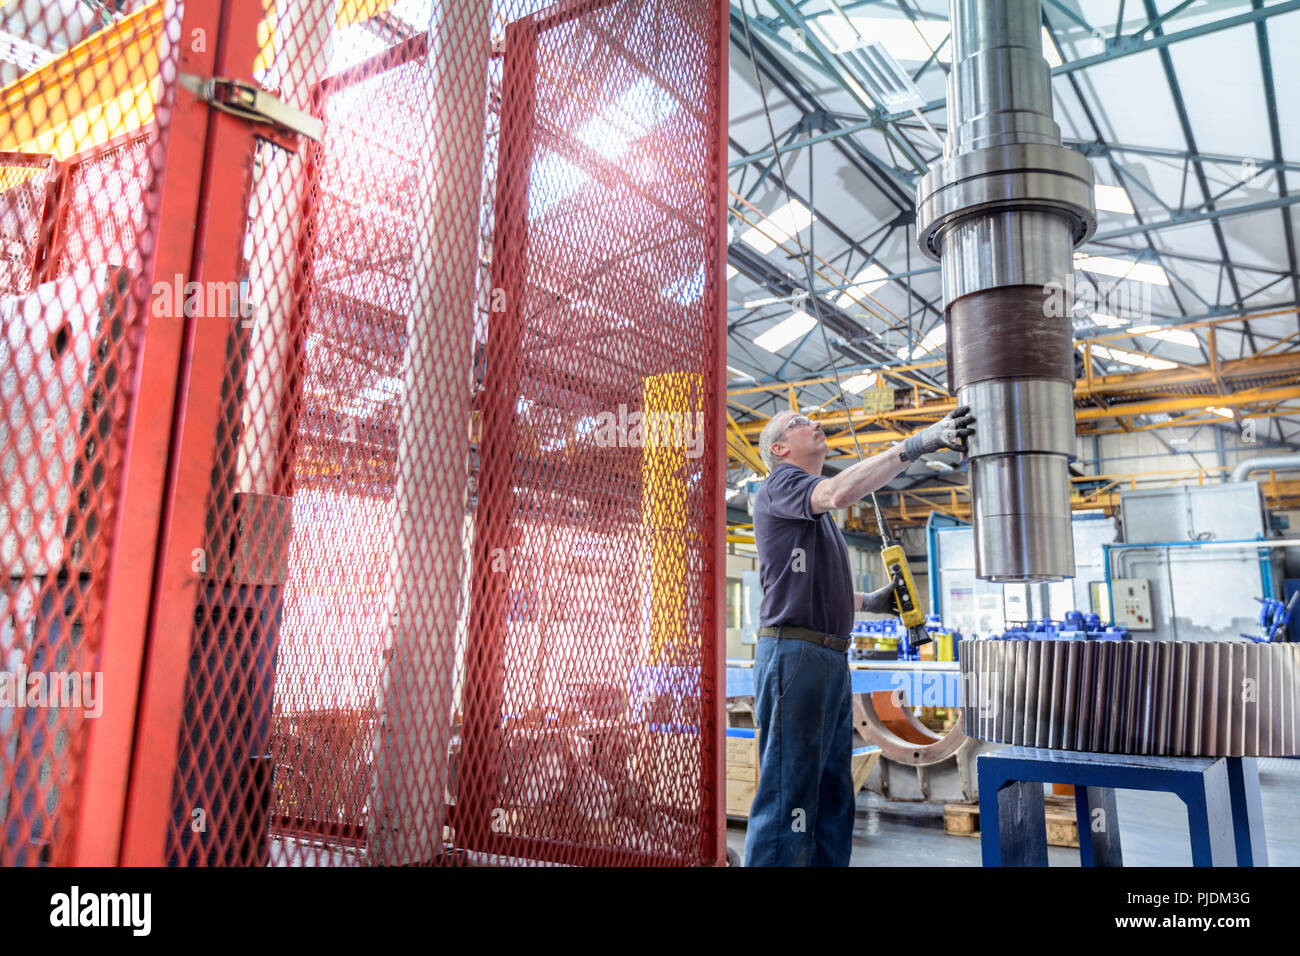 Engineer fitting spindle into heated gear wheel in gearbox factory Stock Photo